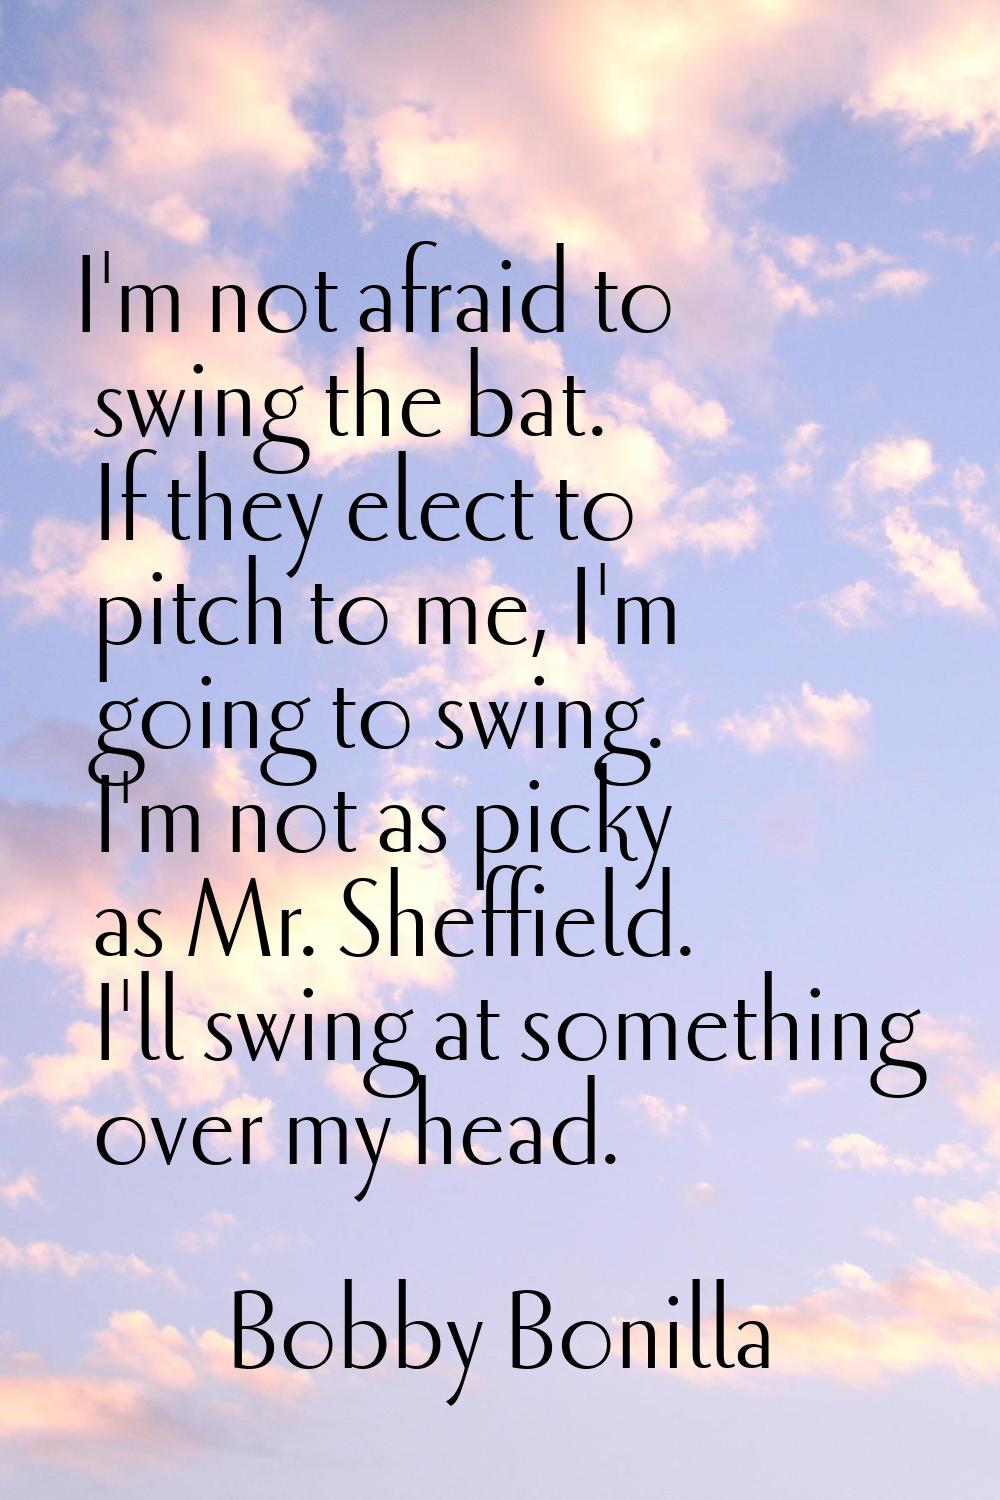 I'm not afraid to swing the bat. If they elect to pitch to me, I'm going to swing. I'm not as picky